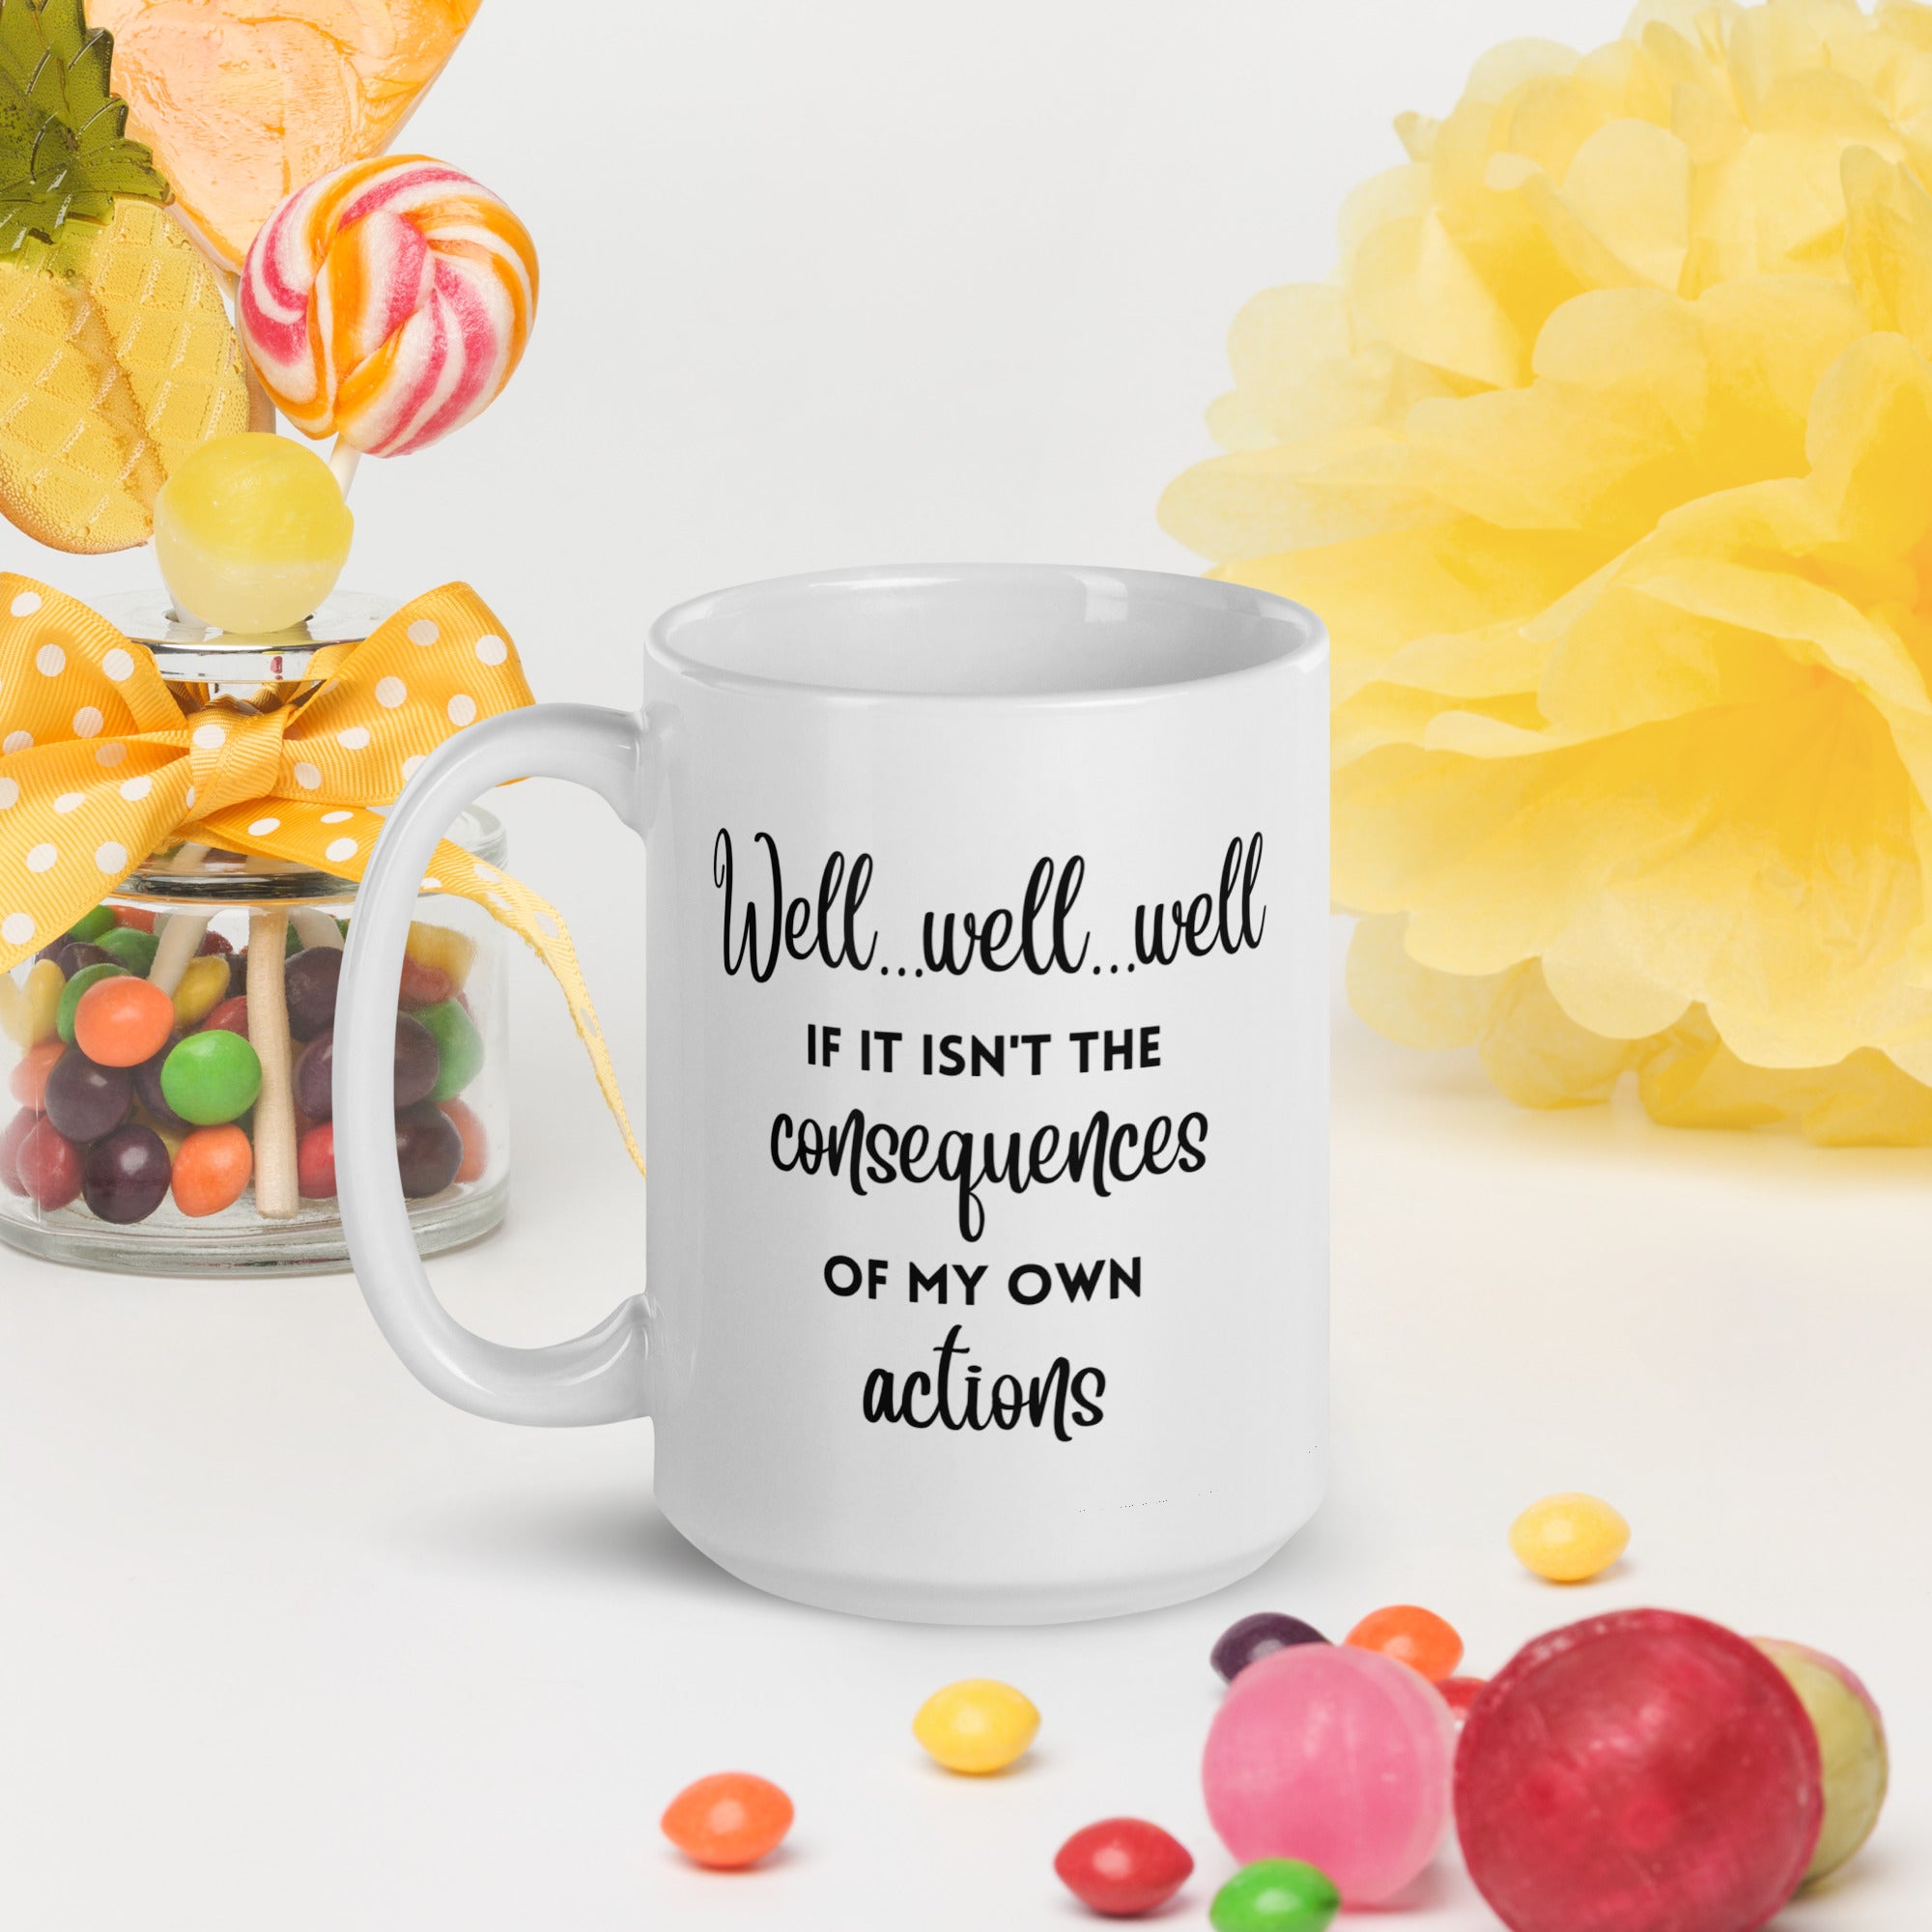 Funny Sarcastic Mug - If It Isn't the Consequences of My Own Actions - Gift